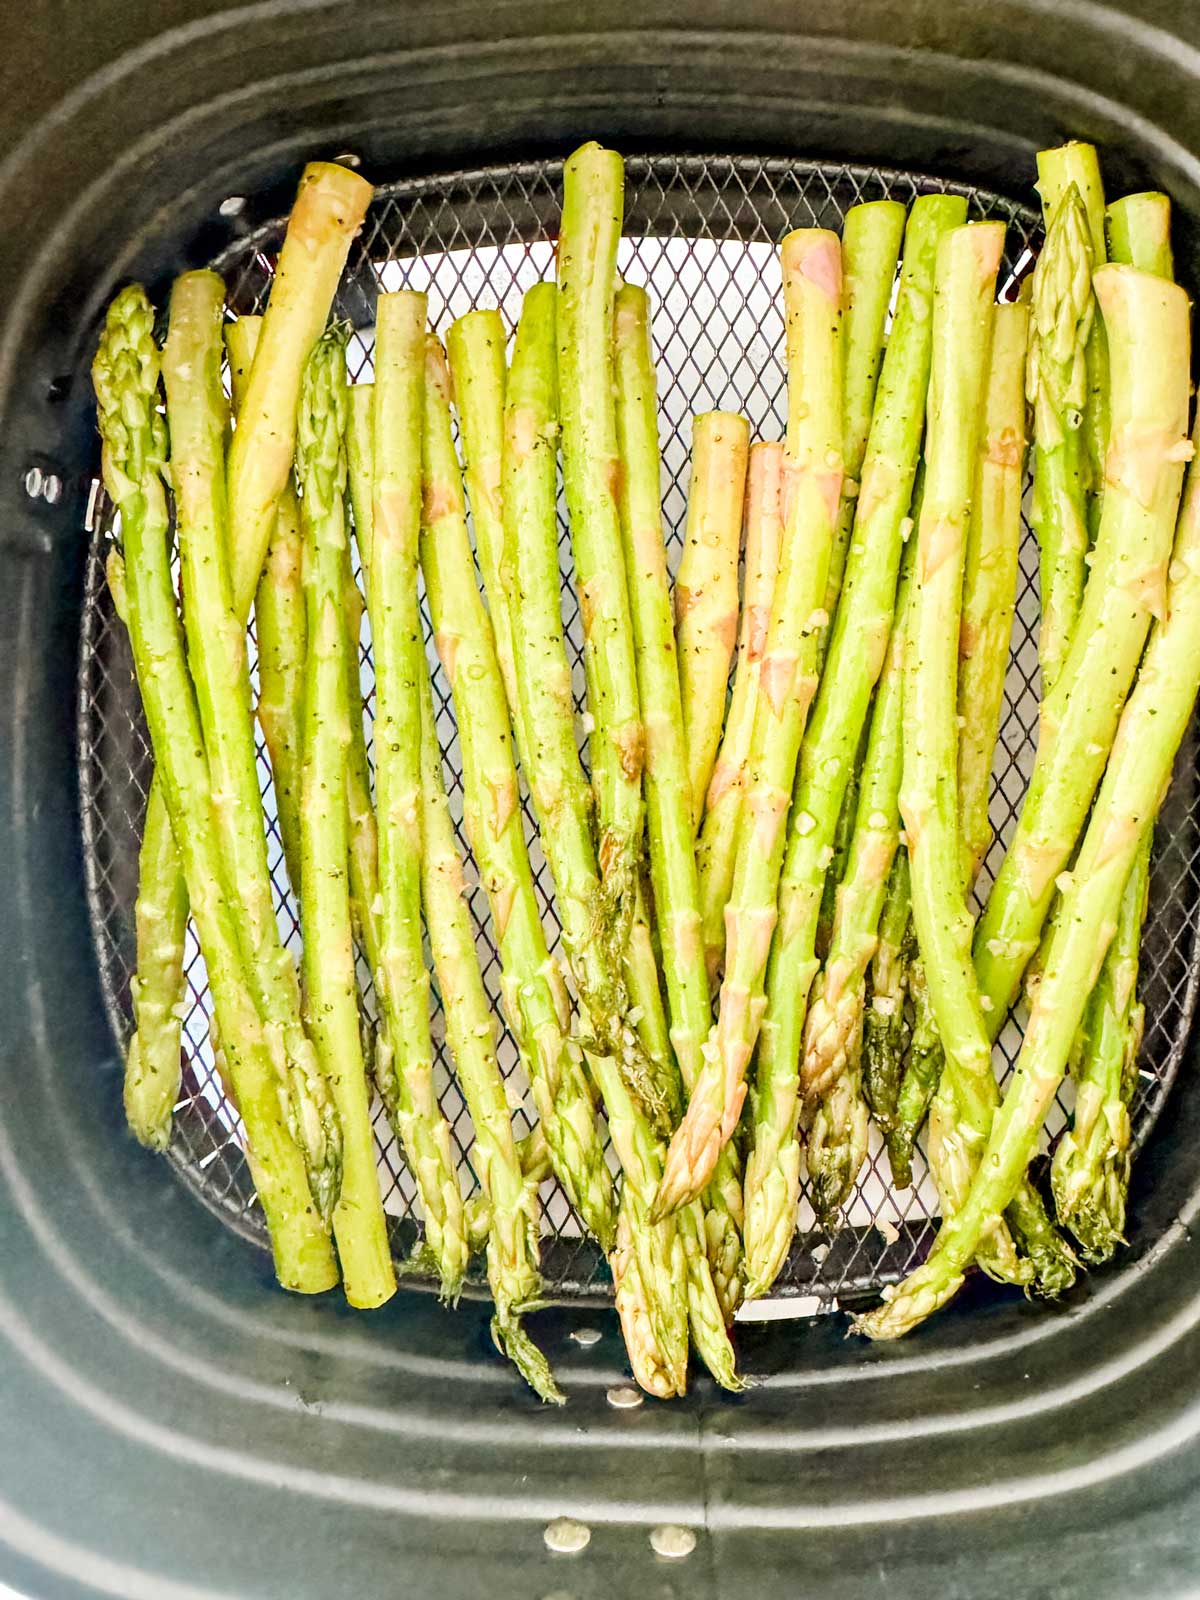 Uncooked asparagus in an air fryer basket.